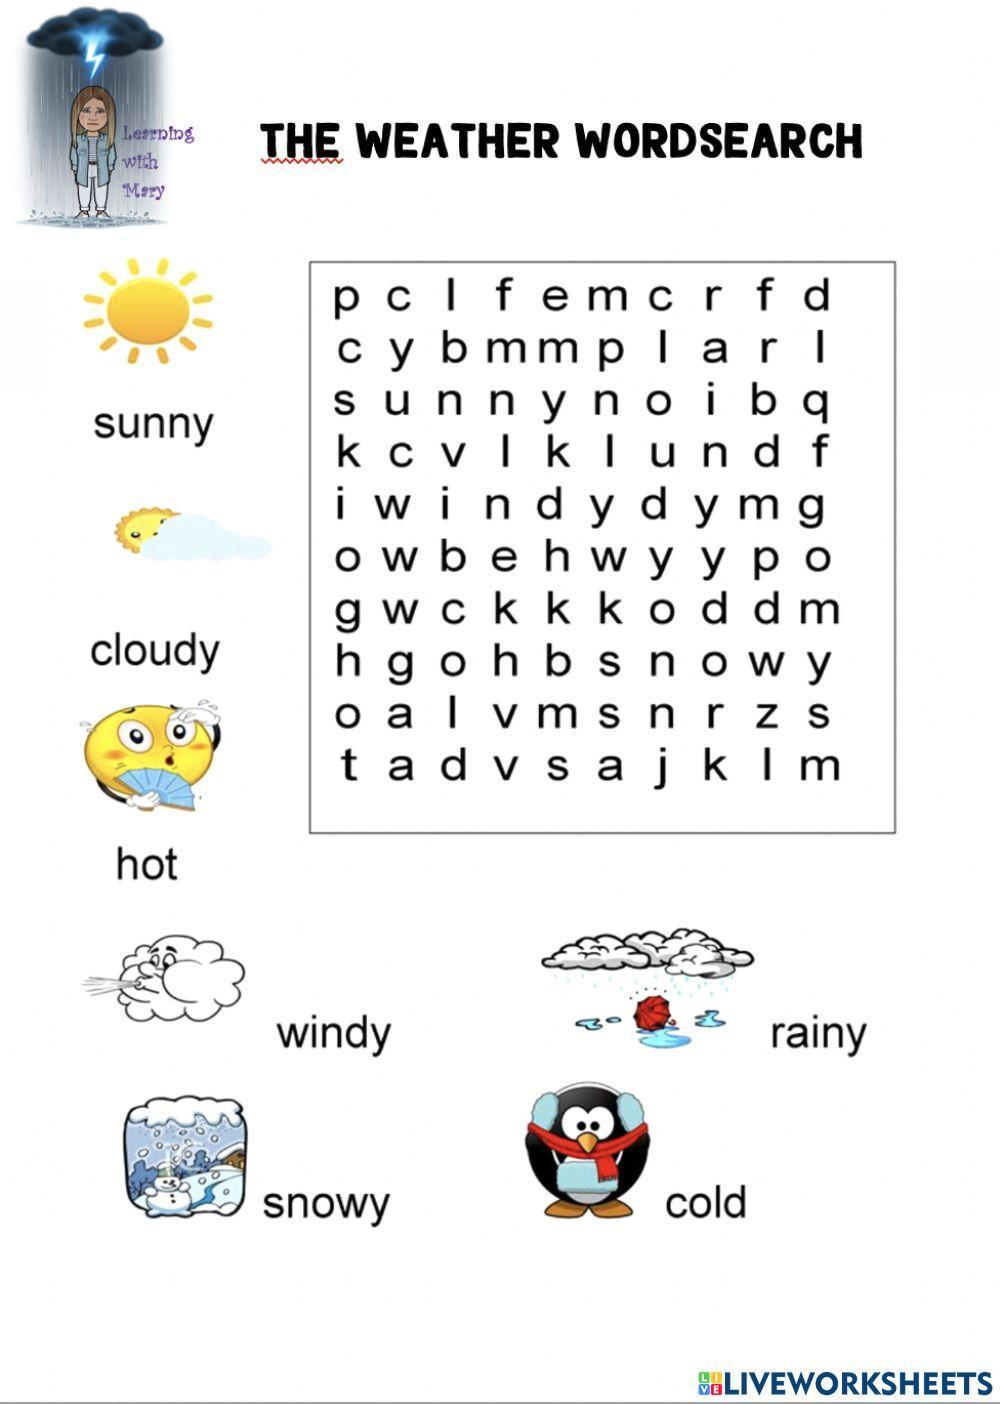 The weather word search